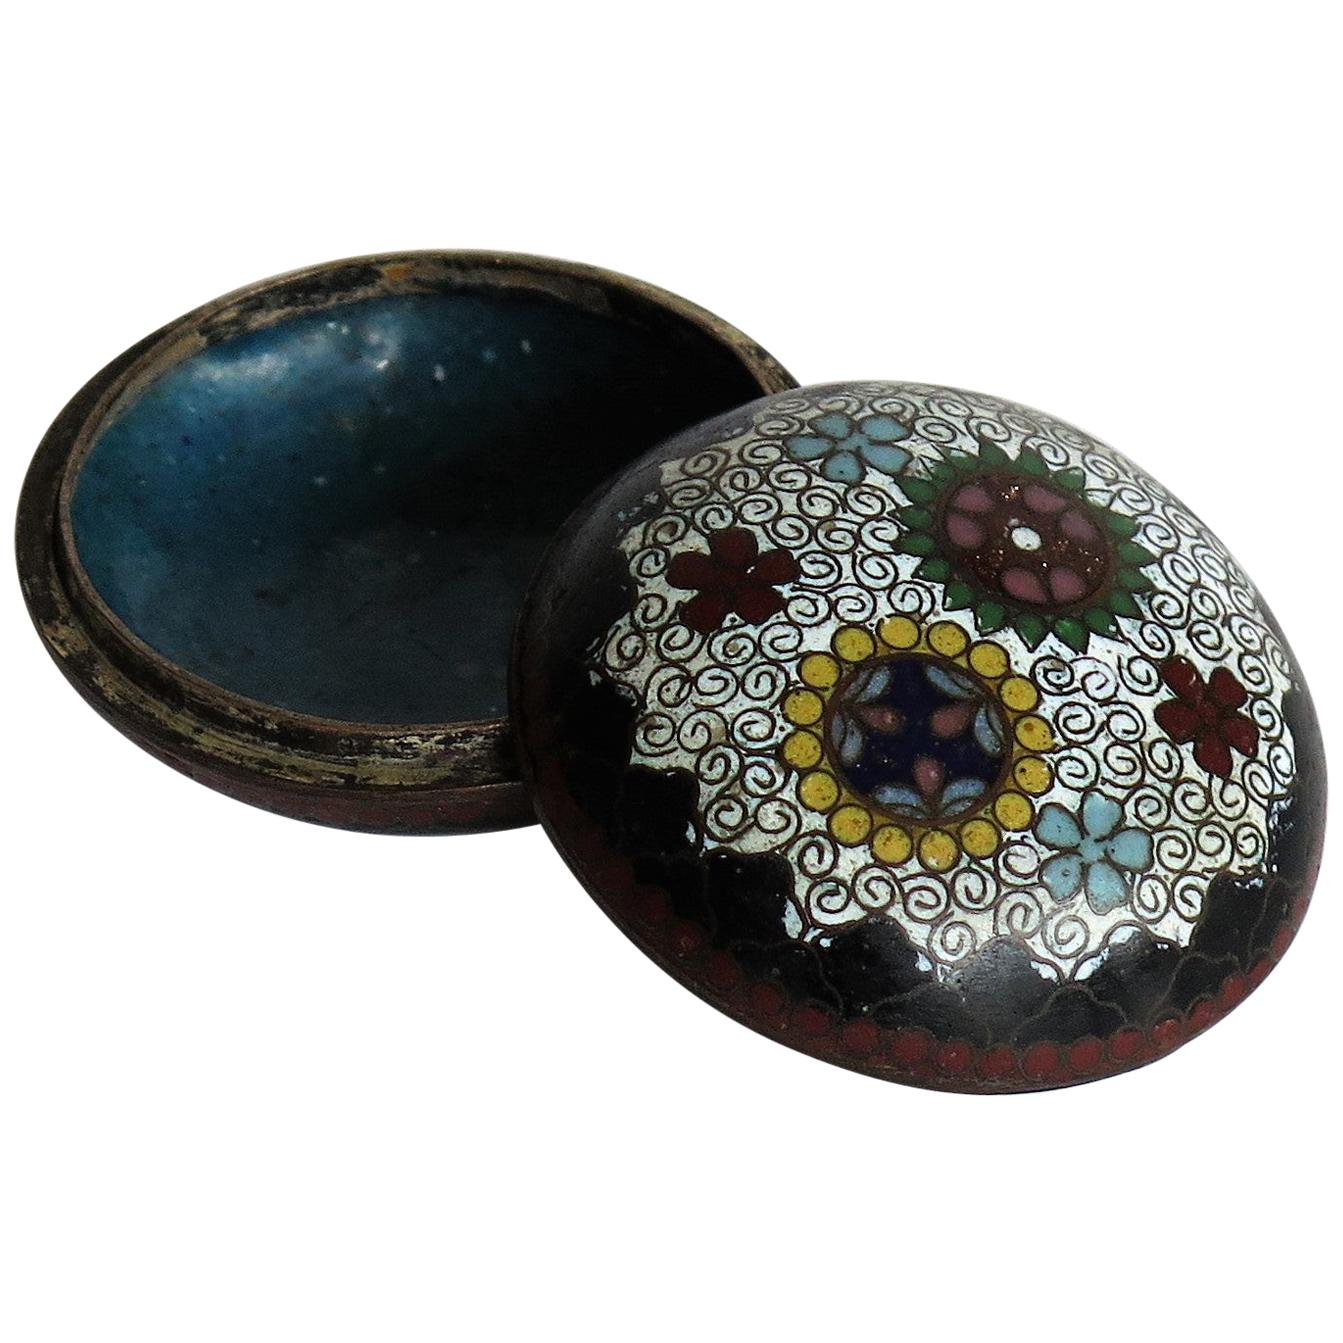 Small Chinese Cloisonné Lidded Box, Qing Dynasty, 19th Century